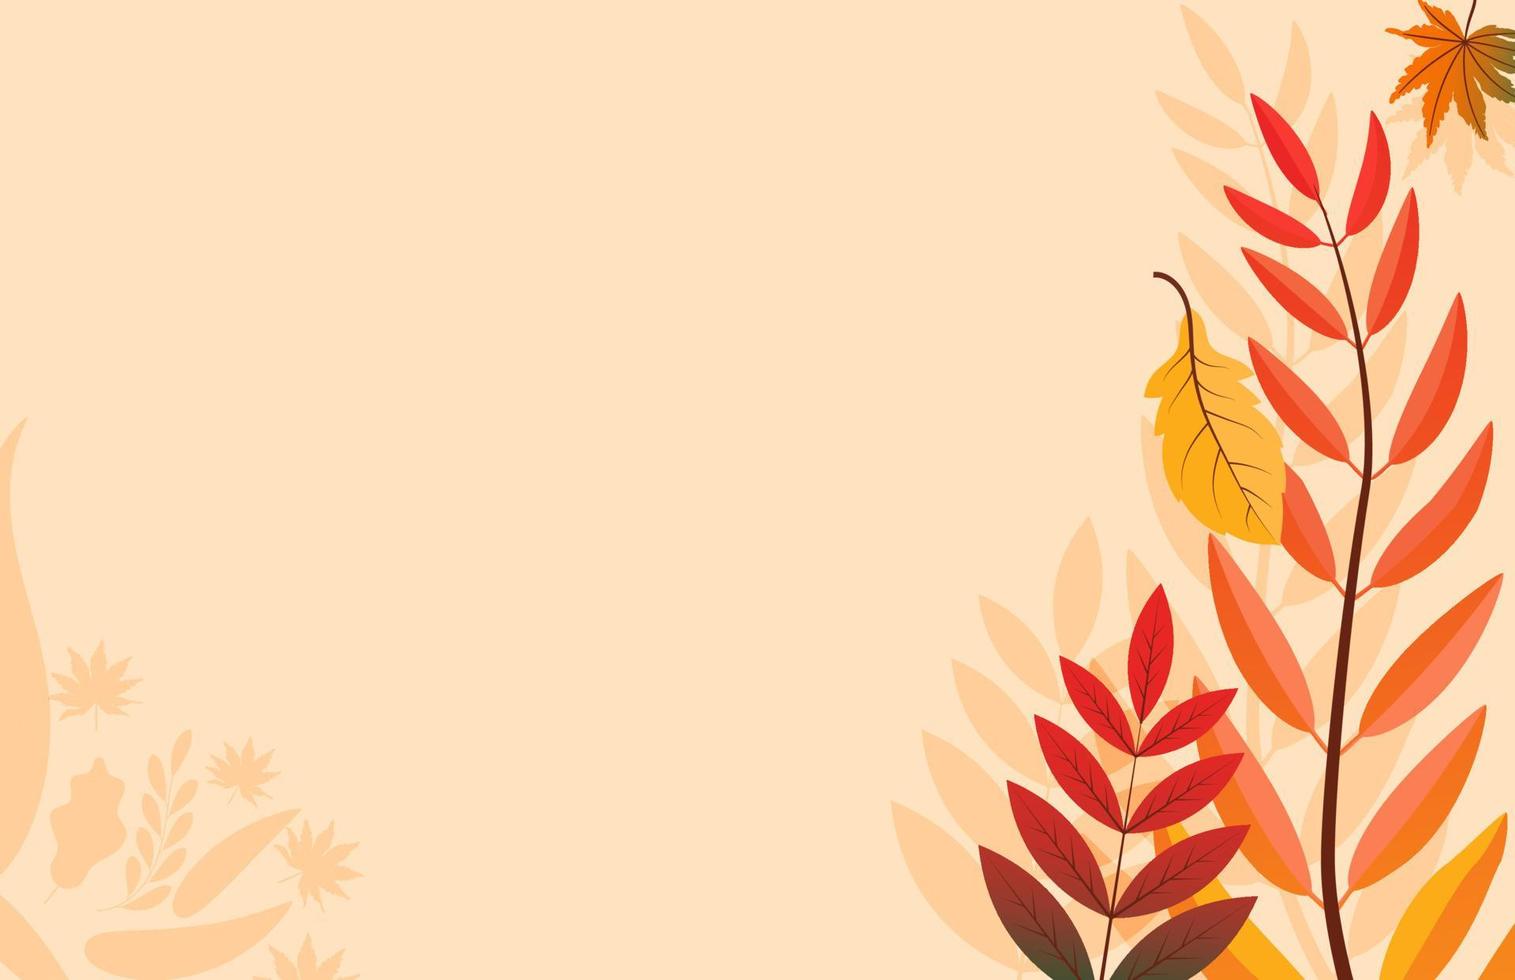 Colorful Autumn fall leaves floral background illustration with maple leaf vector